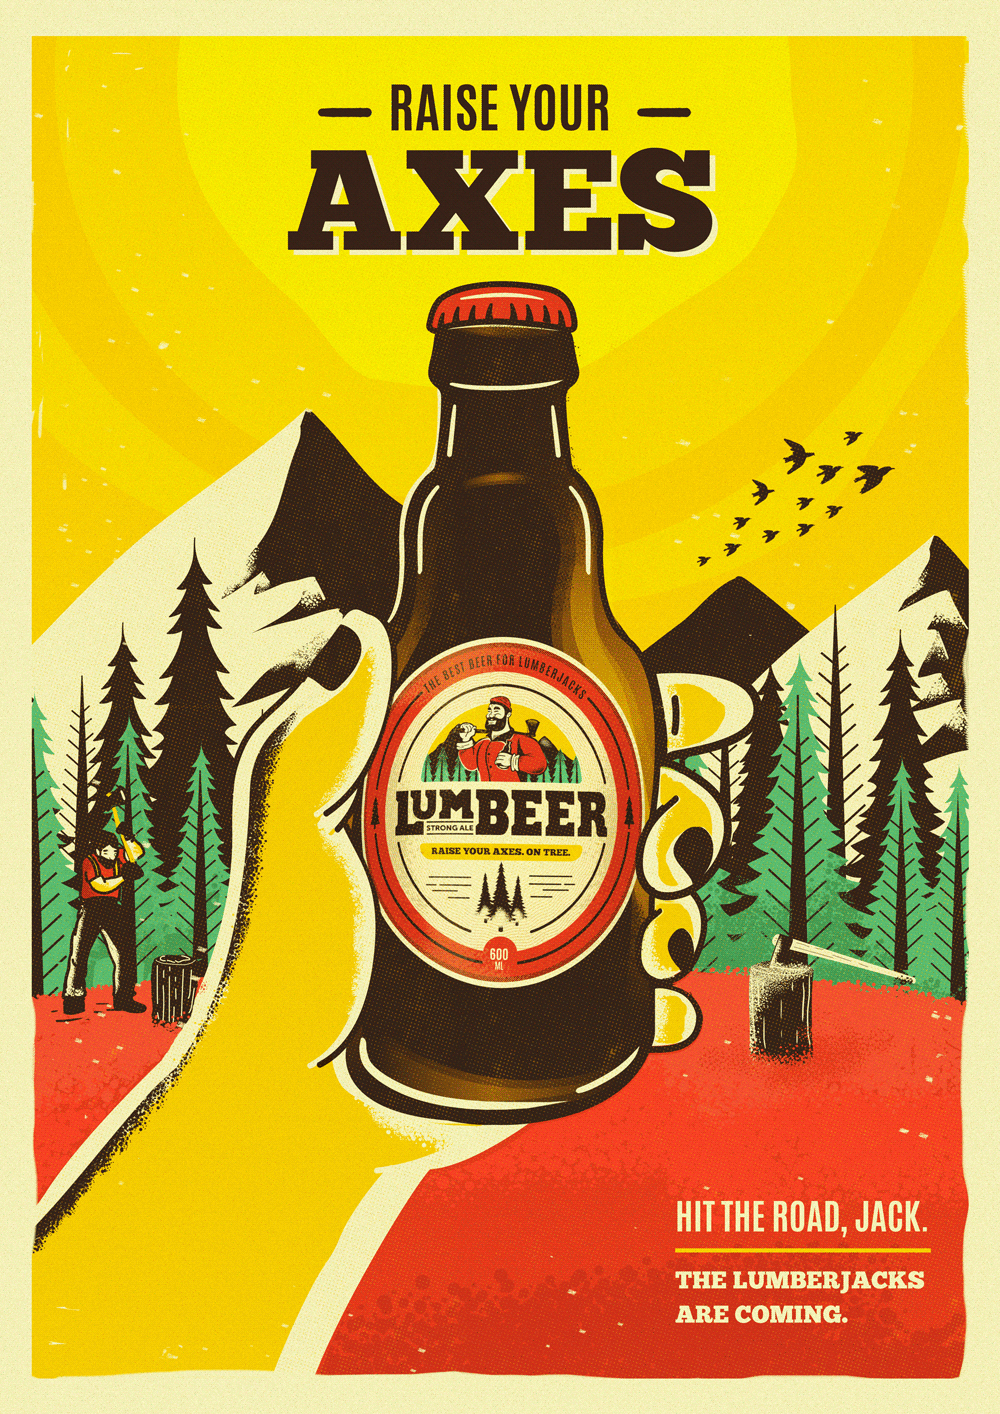 poster_lumbeer_completo-2